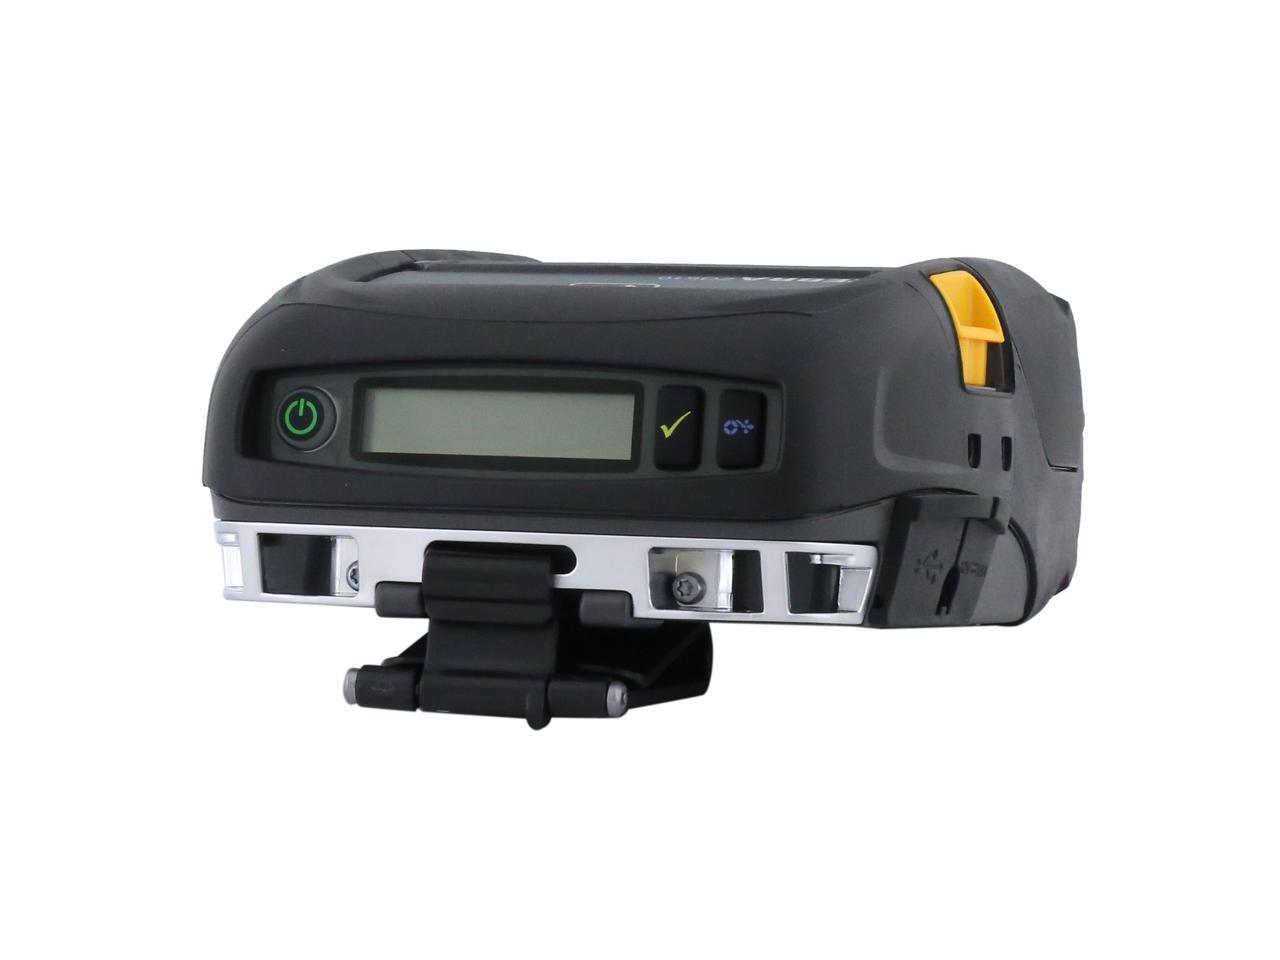 Zebra Zq510 3 Mobile Direct Thermal Receipt And Label Printer 203 Dpi Bluetooth 40 Linered 3055